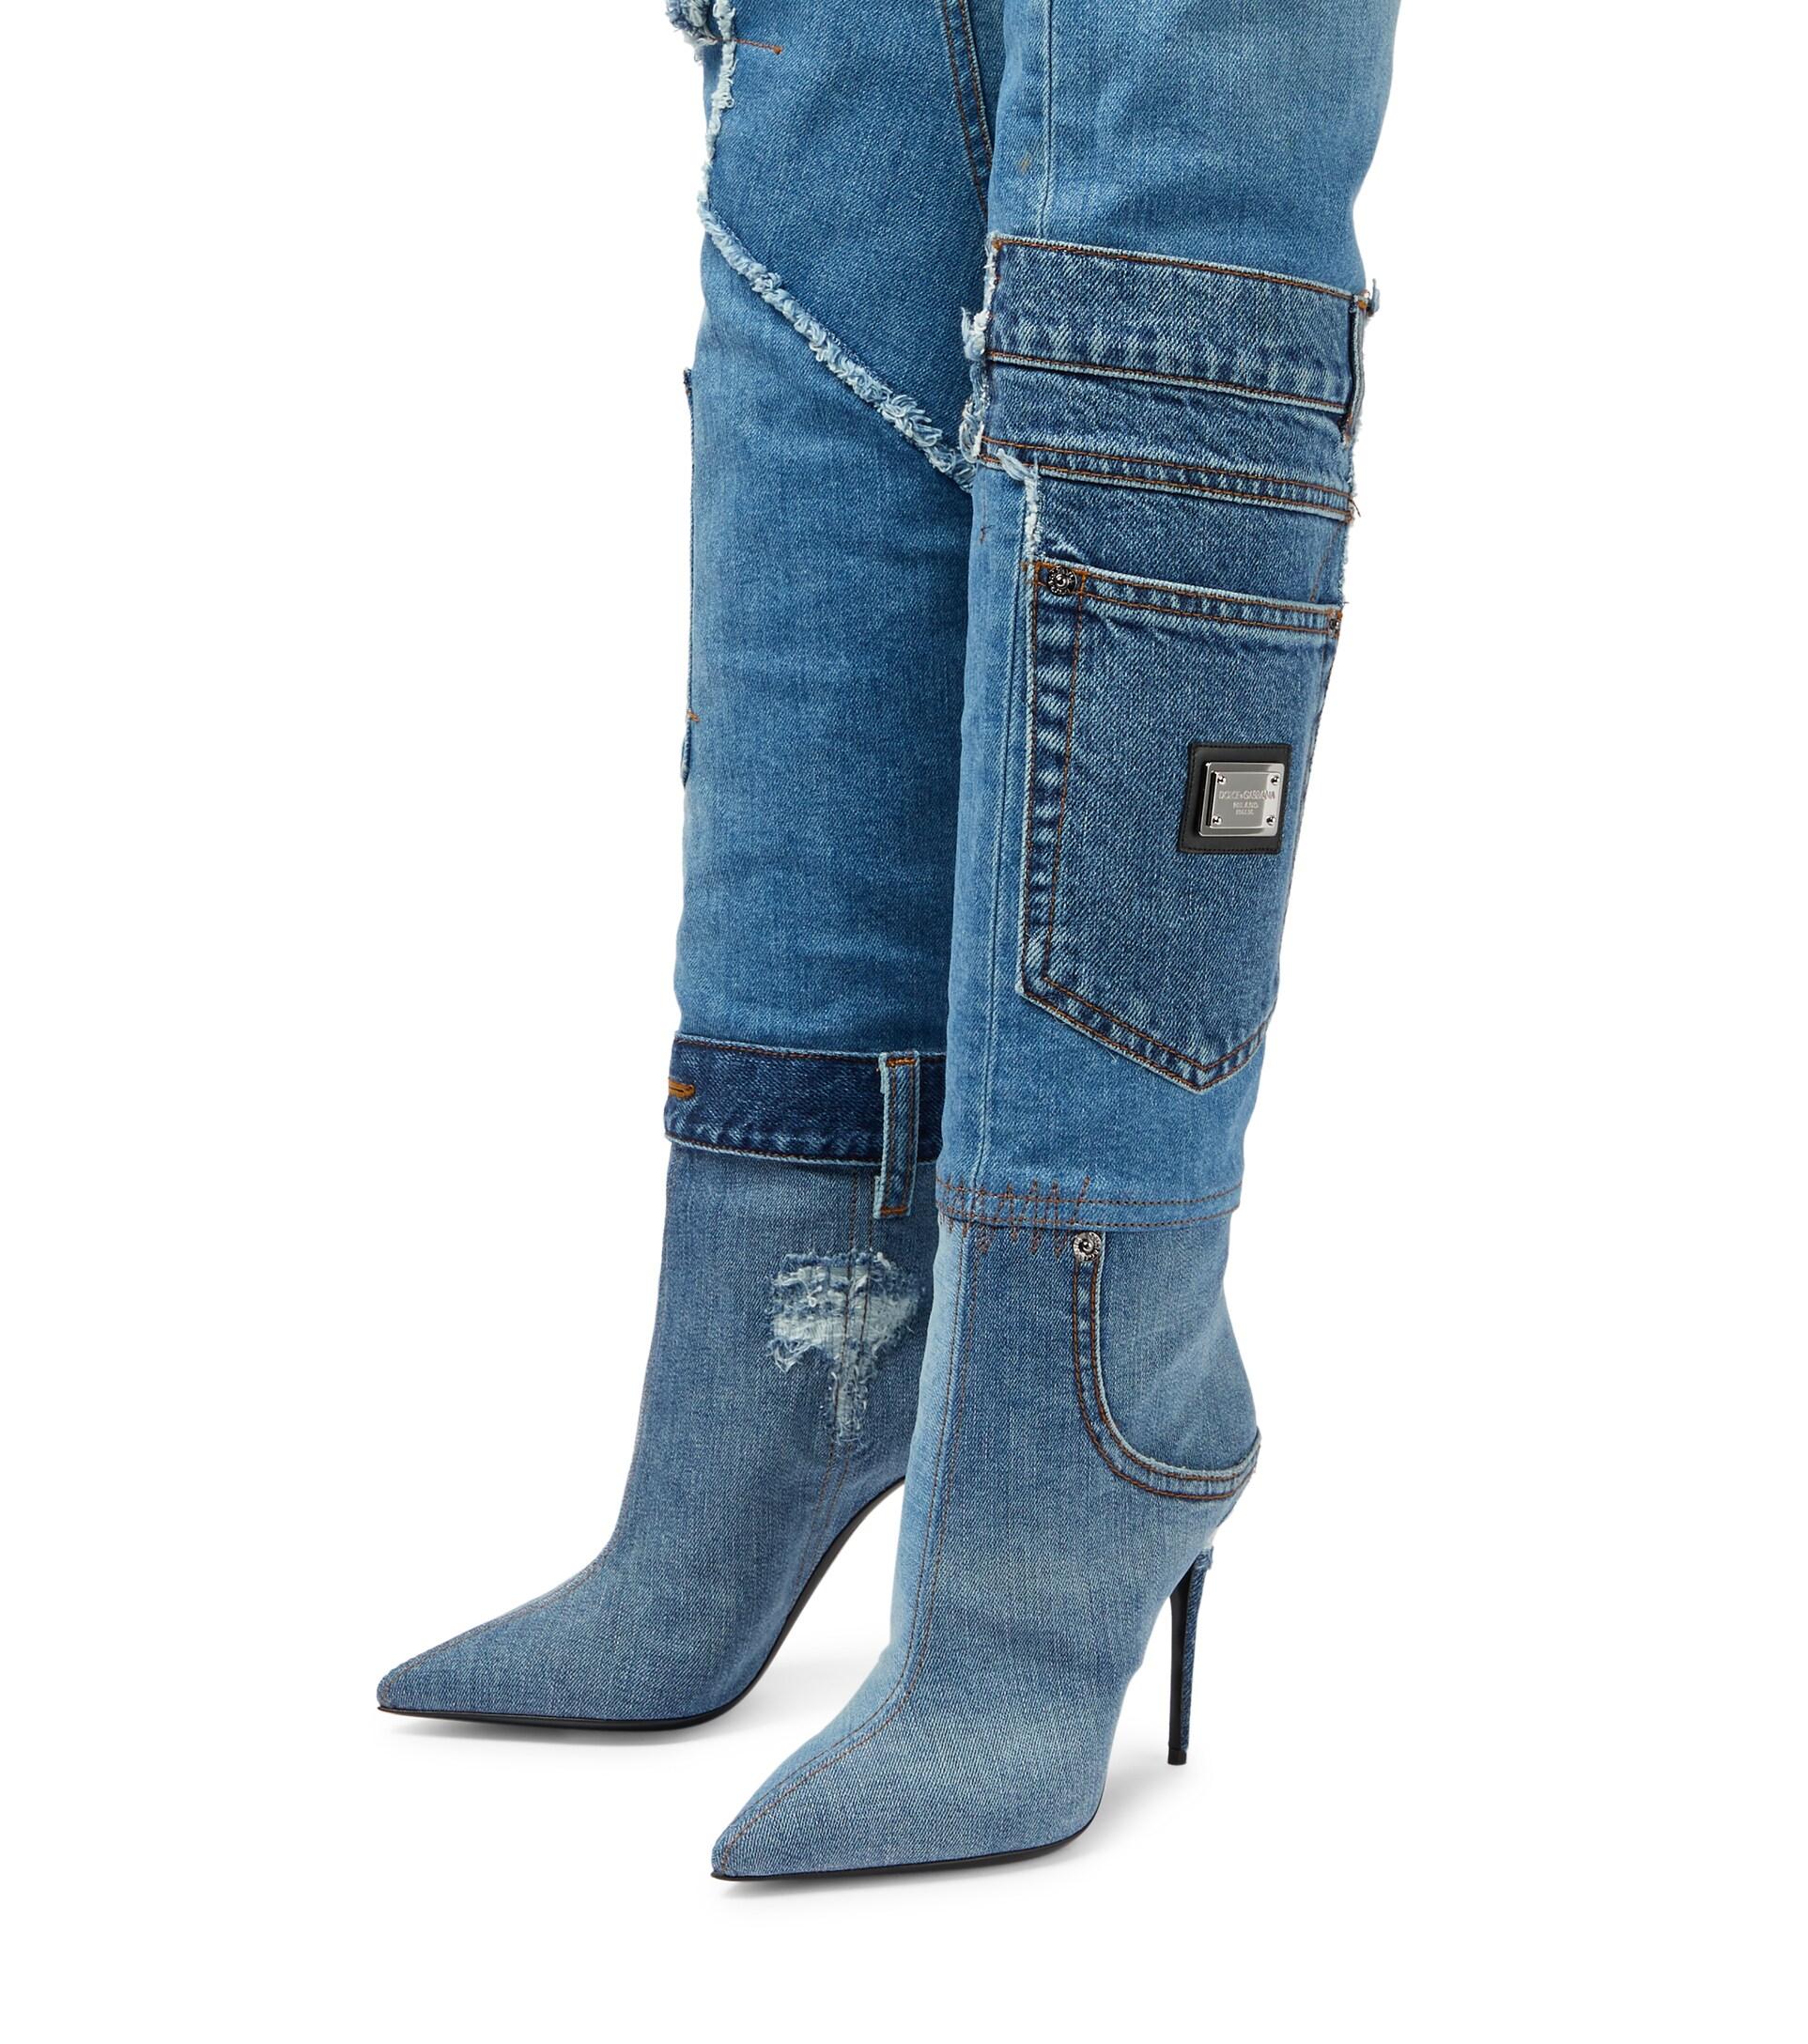 Dolce & Gabbana Cardinale 105 Denim Over-the-knee Boots in Blue | Lyst